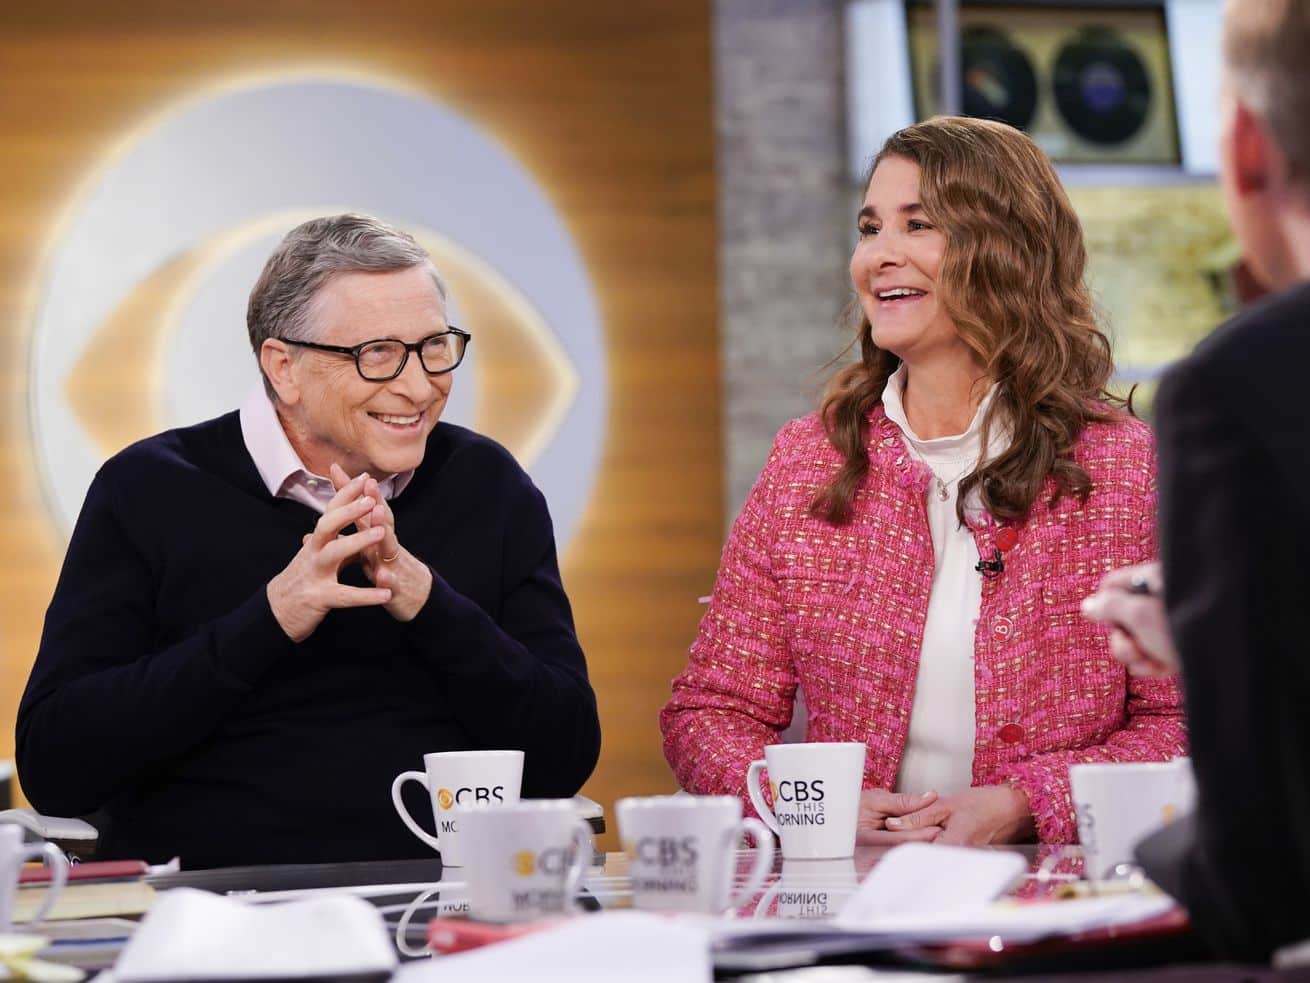 The biggest impact of the Gates divorce may have nothing to do with the Gates Foundation